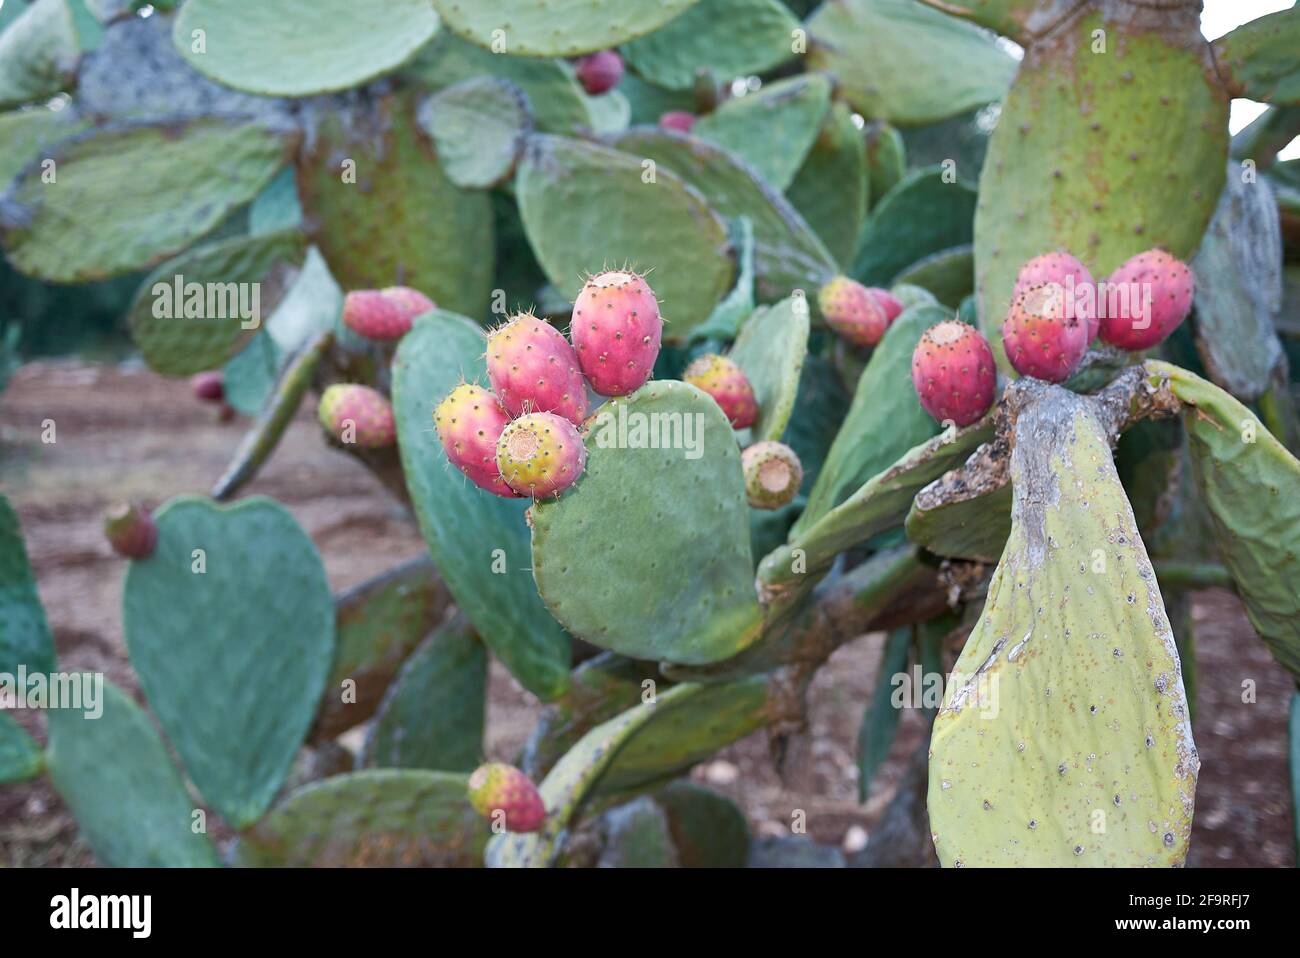 Opuntia ficus-indica shrub with fresh Indian figs Stock Photo